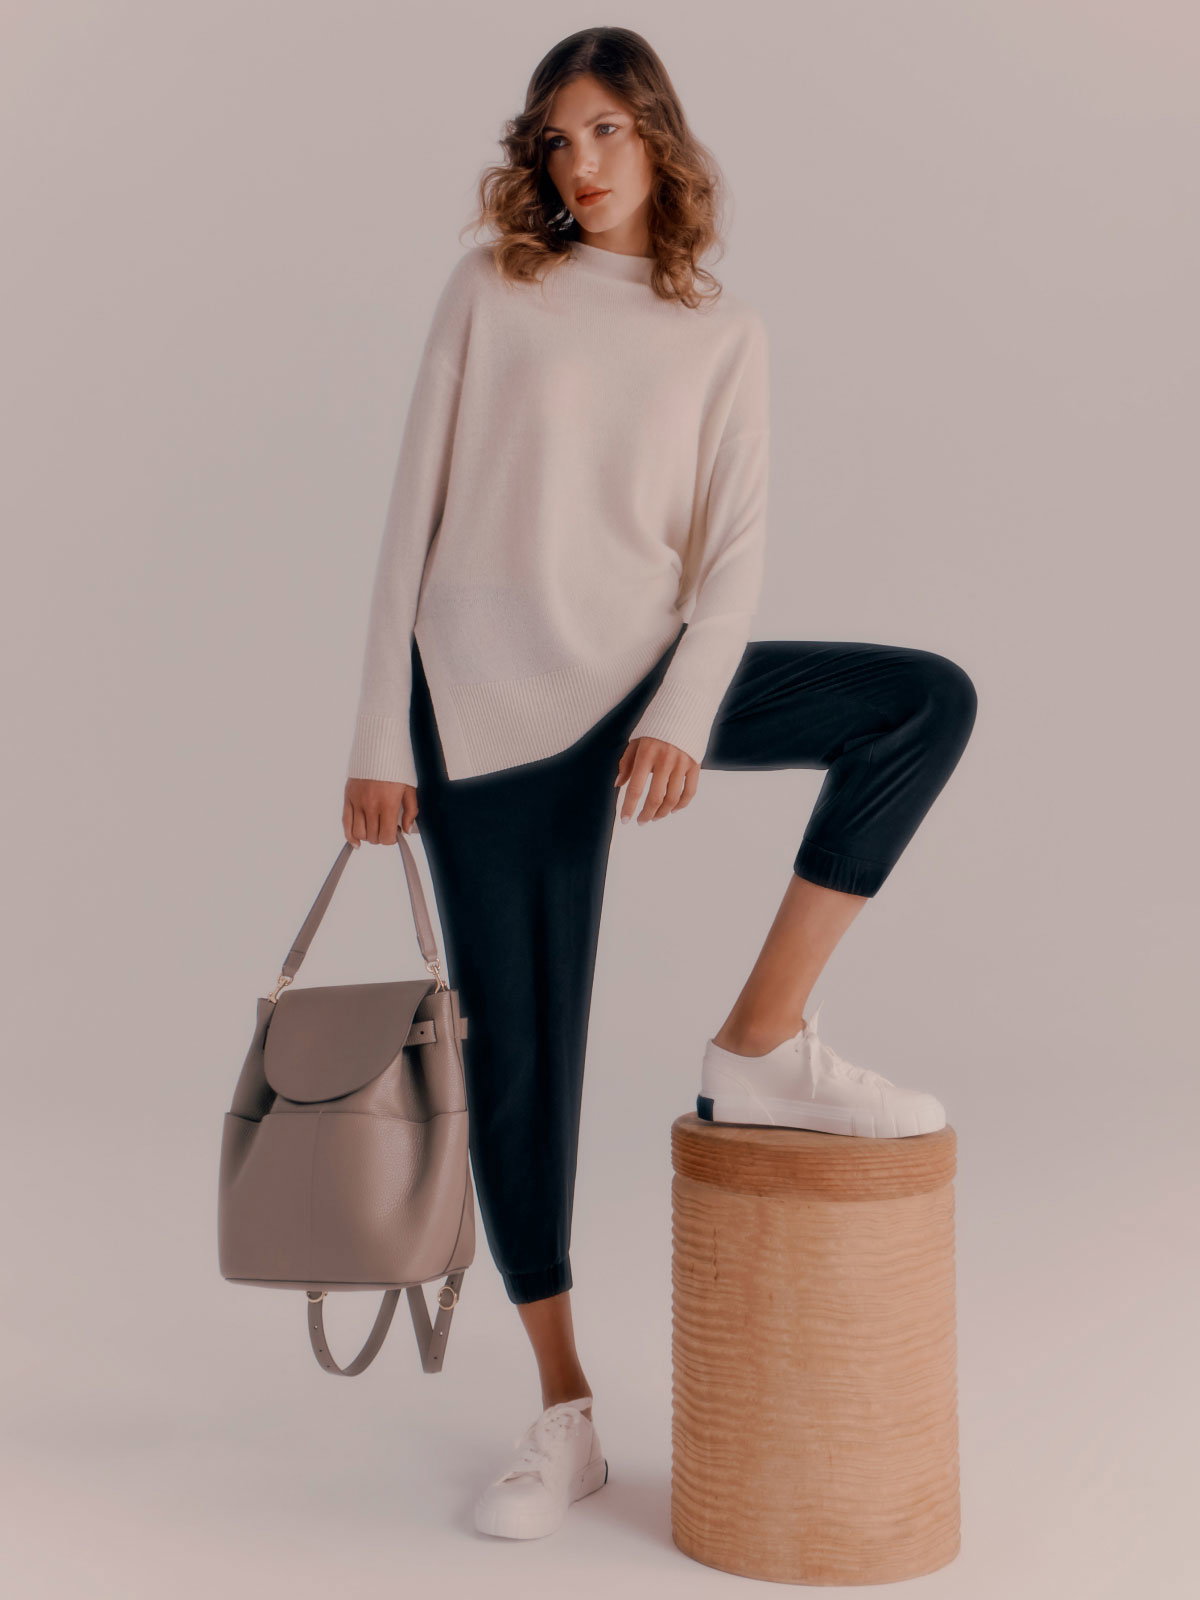 Cuyana: Meet Our New Washable Silk Pant